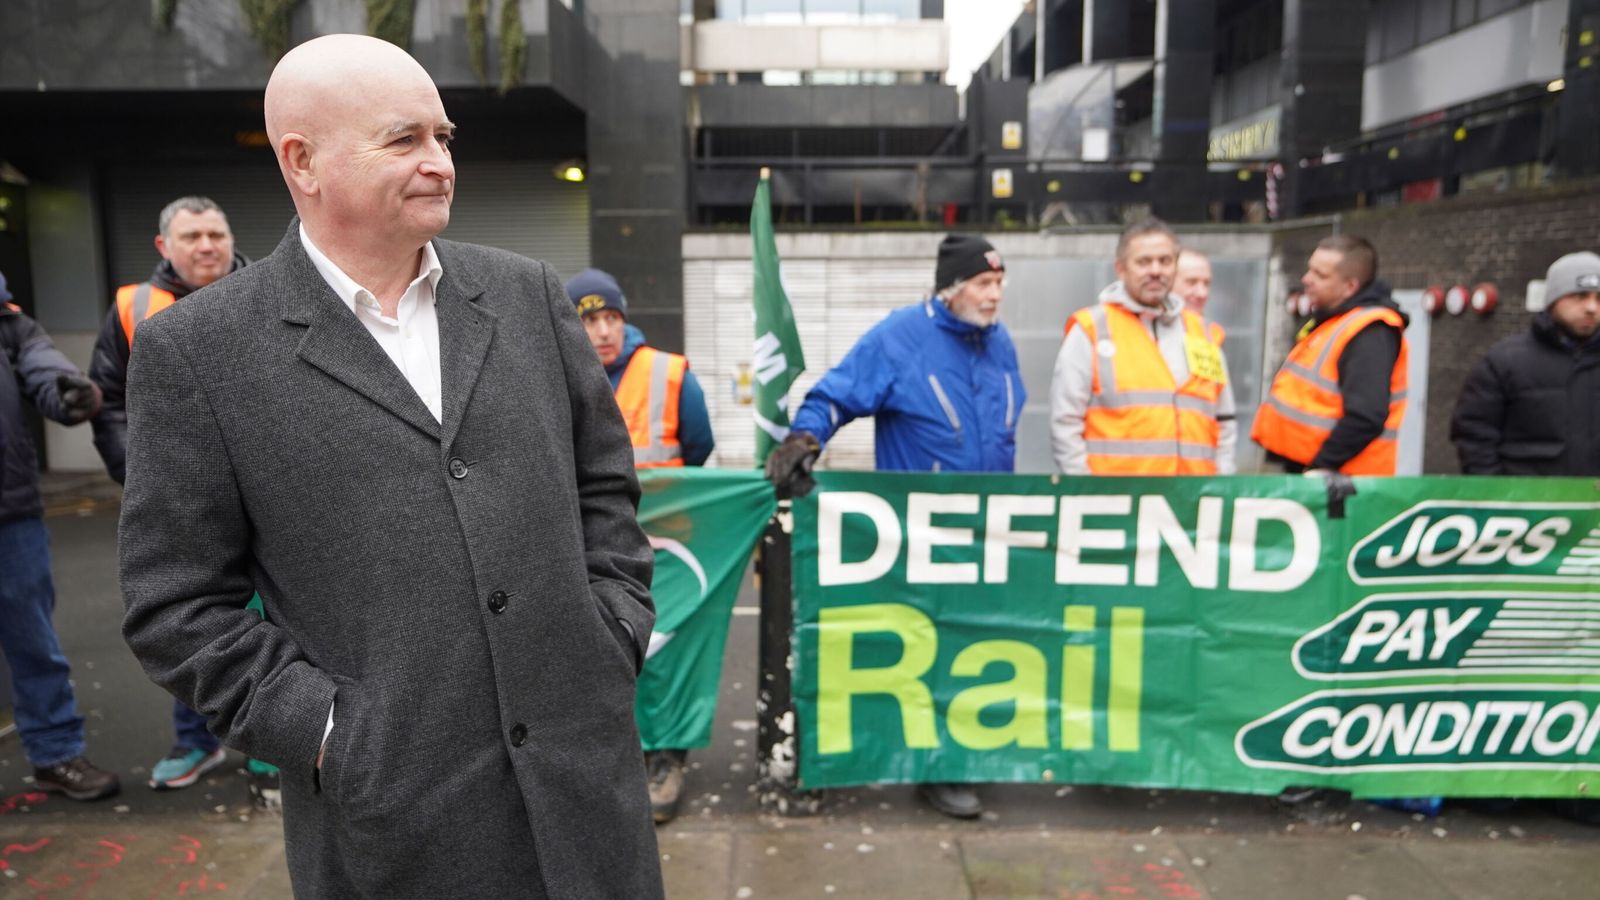 RMT members back further strike action in row with train operating companies